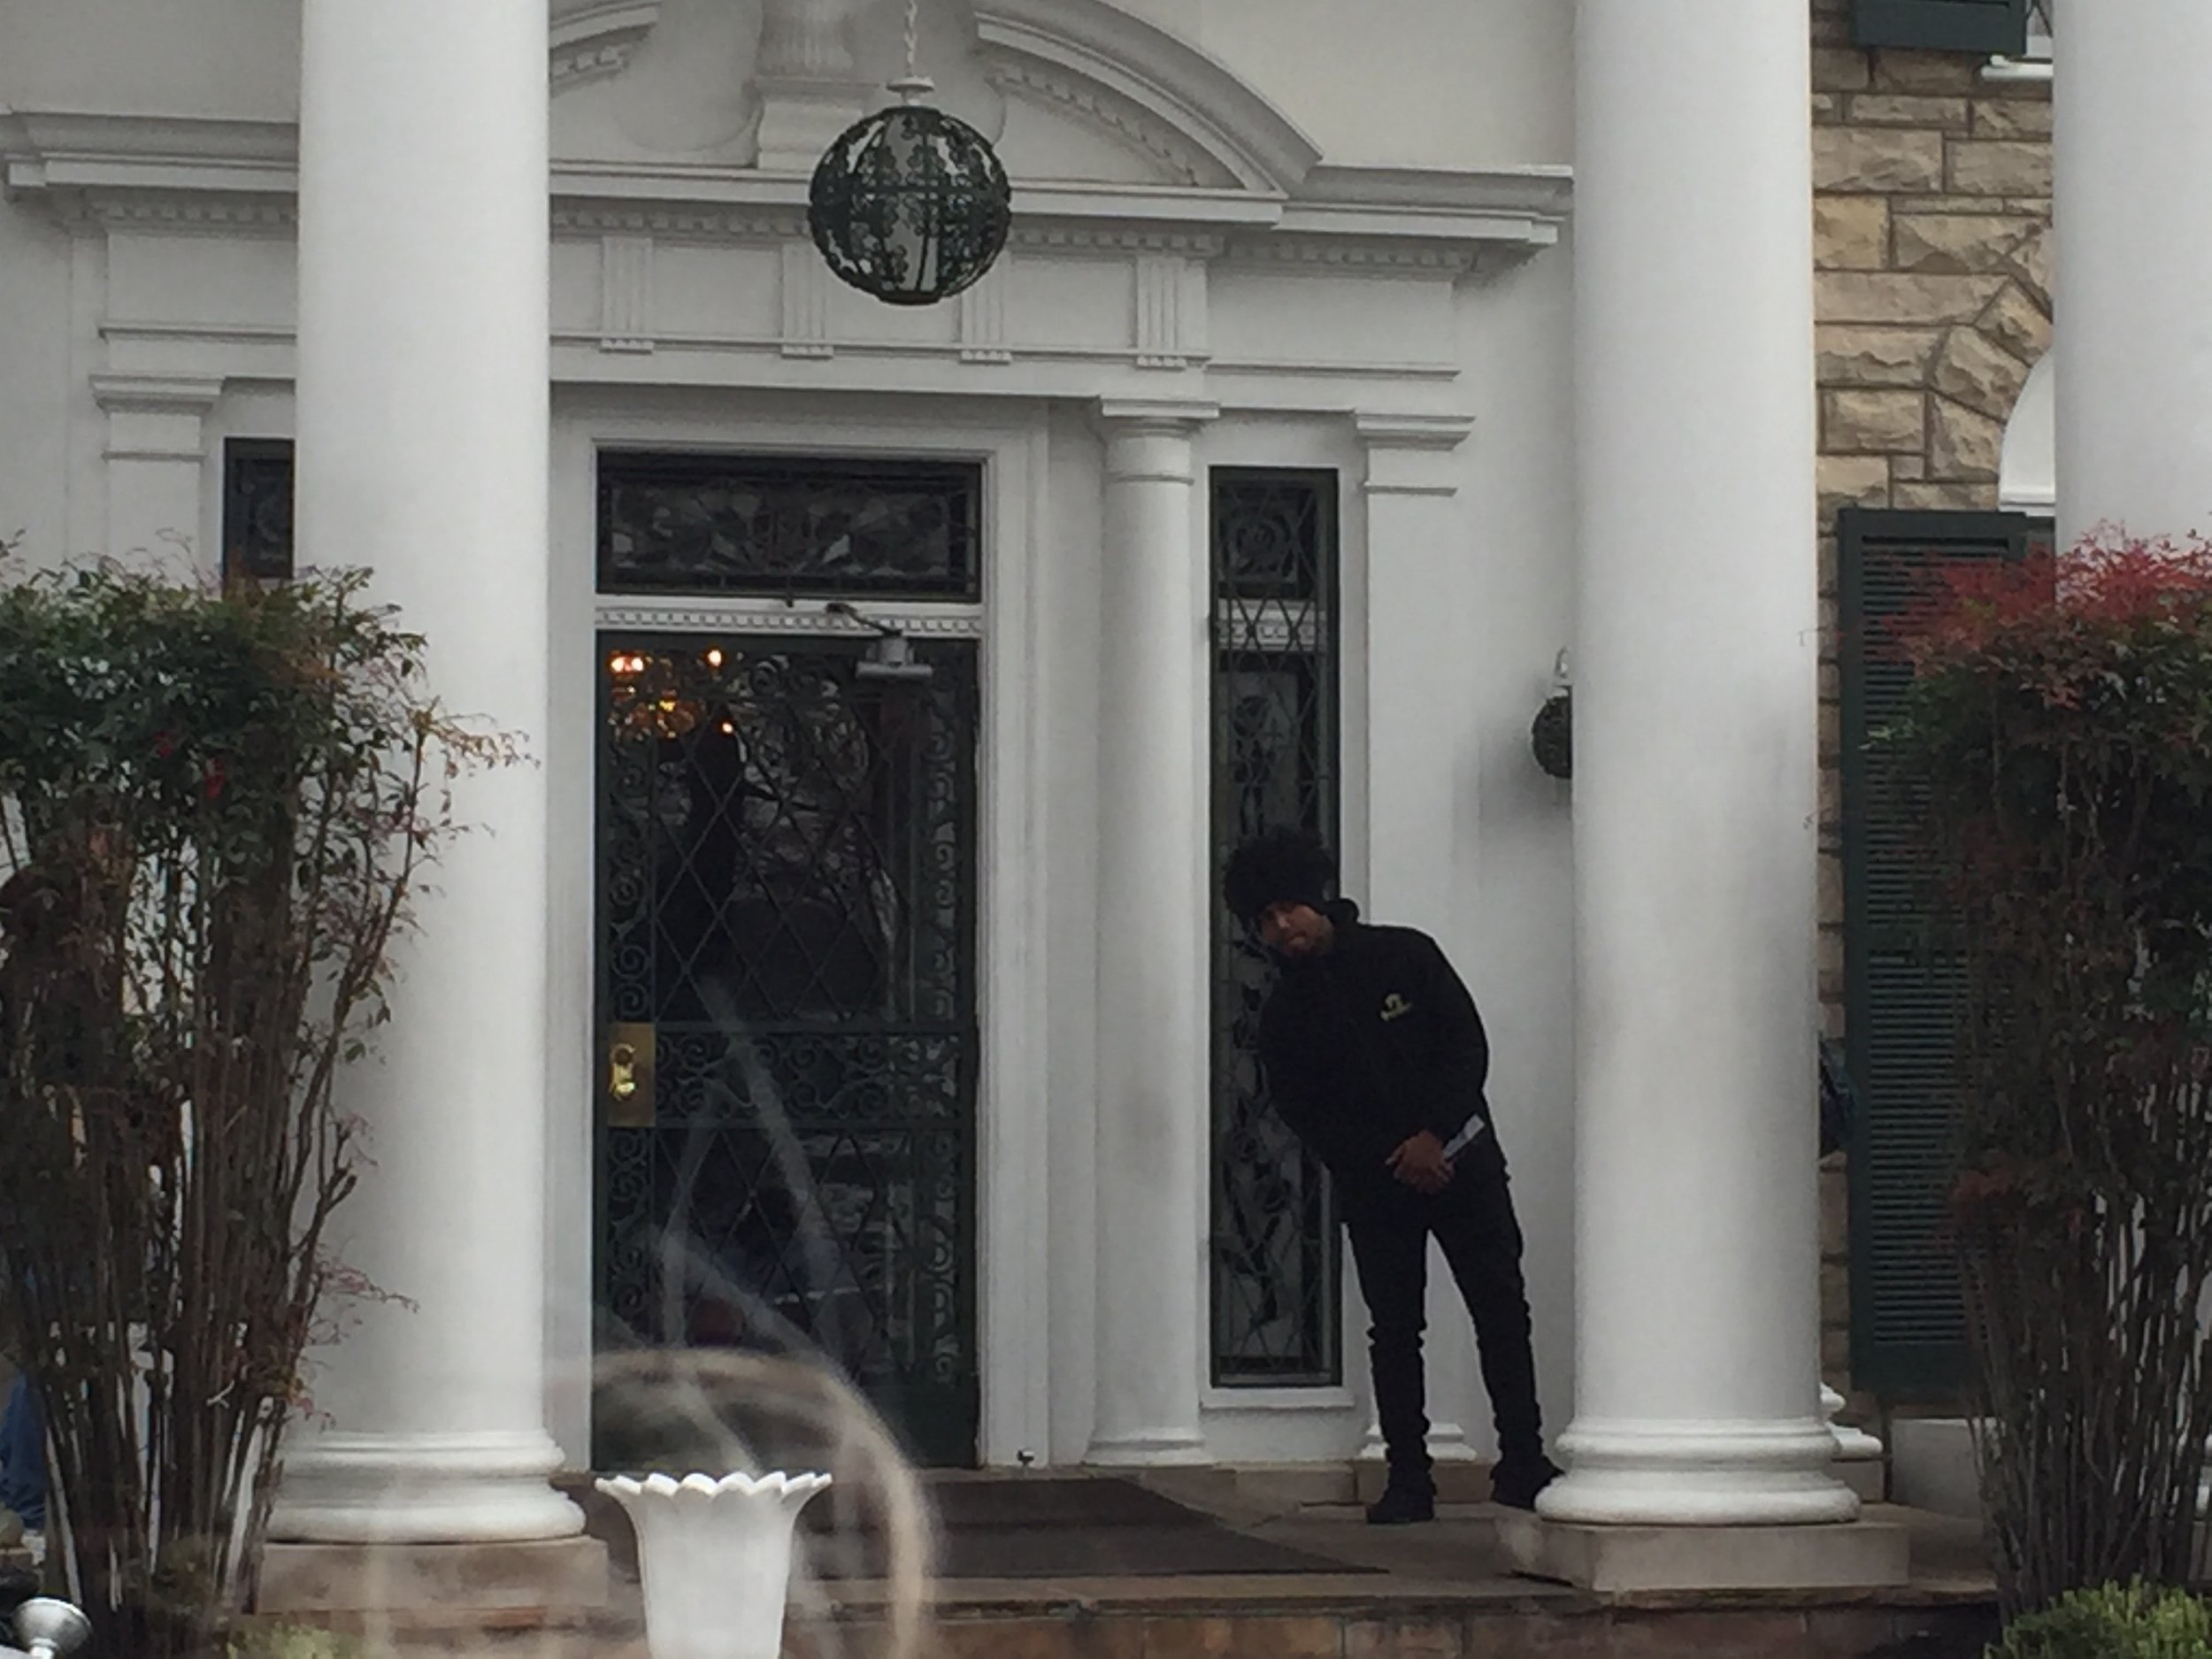  A tour guide at Graceland’s front door awaits the next busload of visitors.      